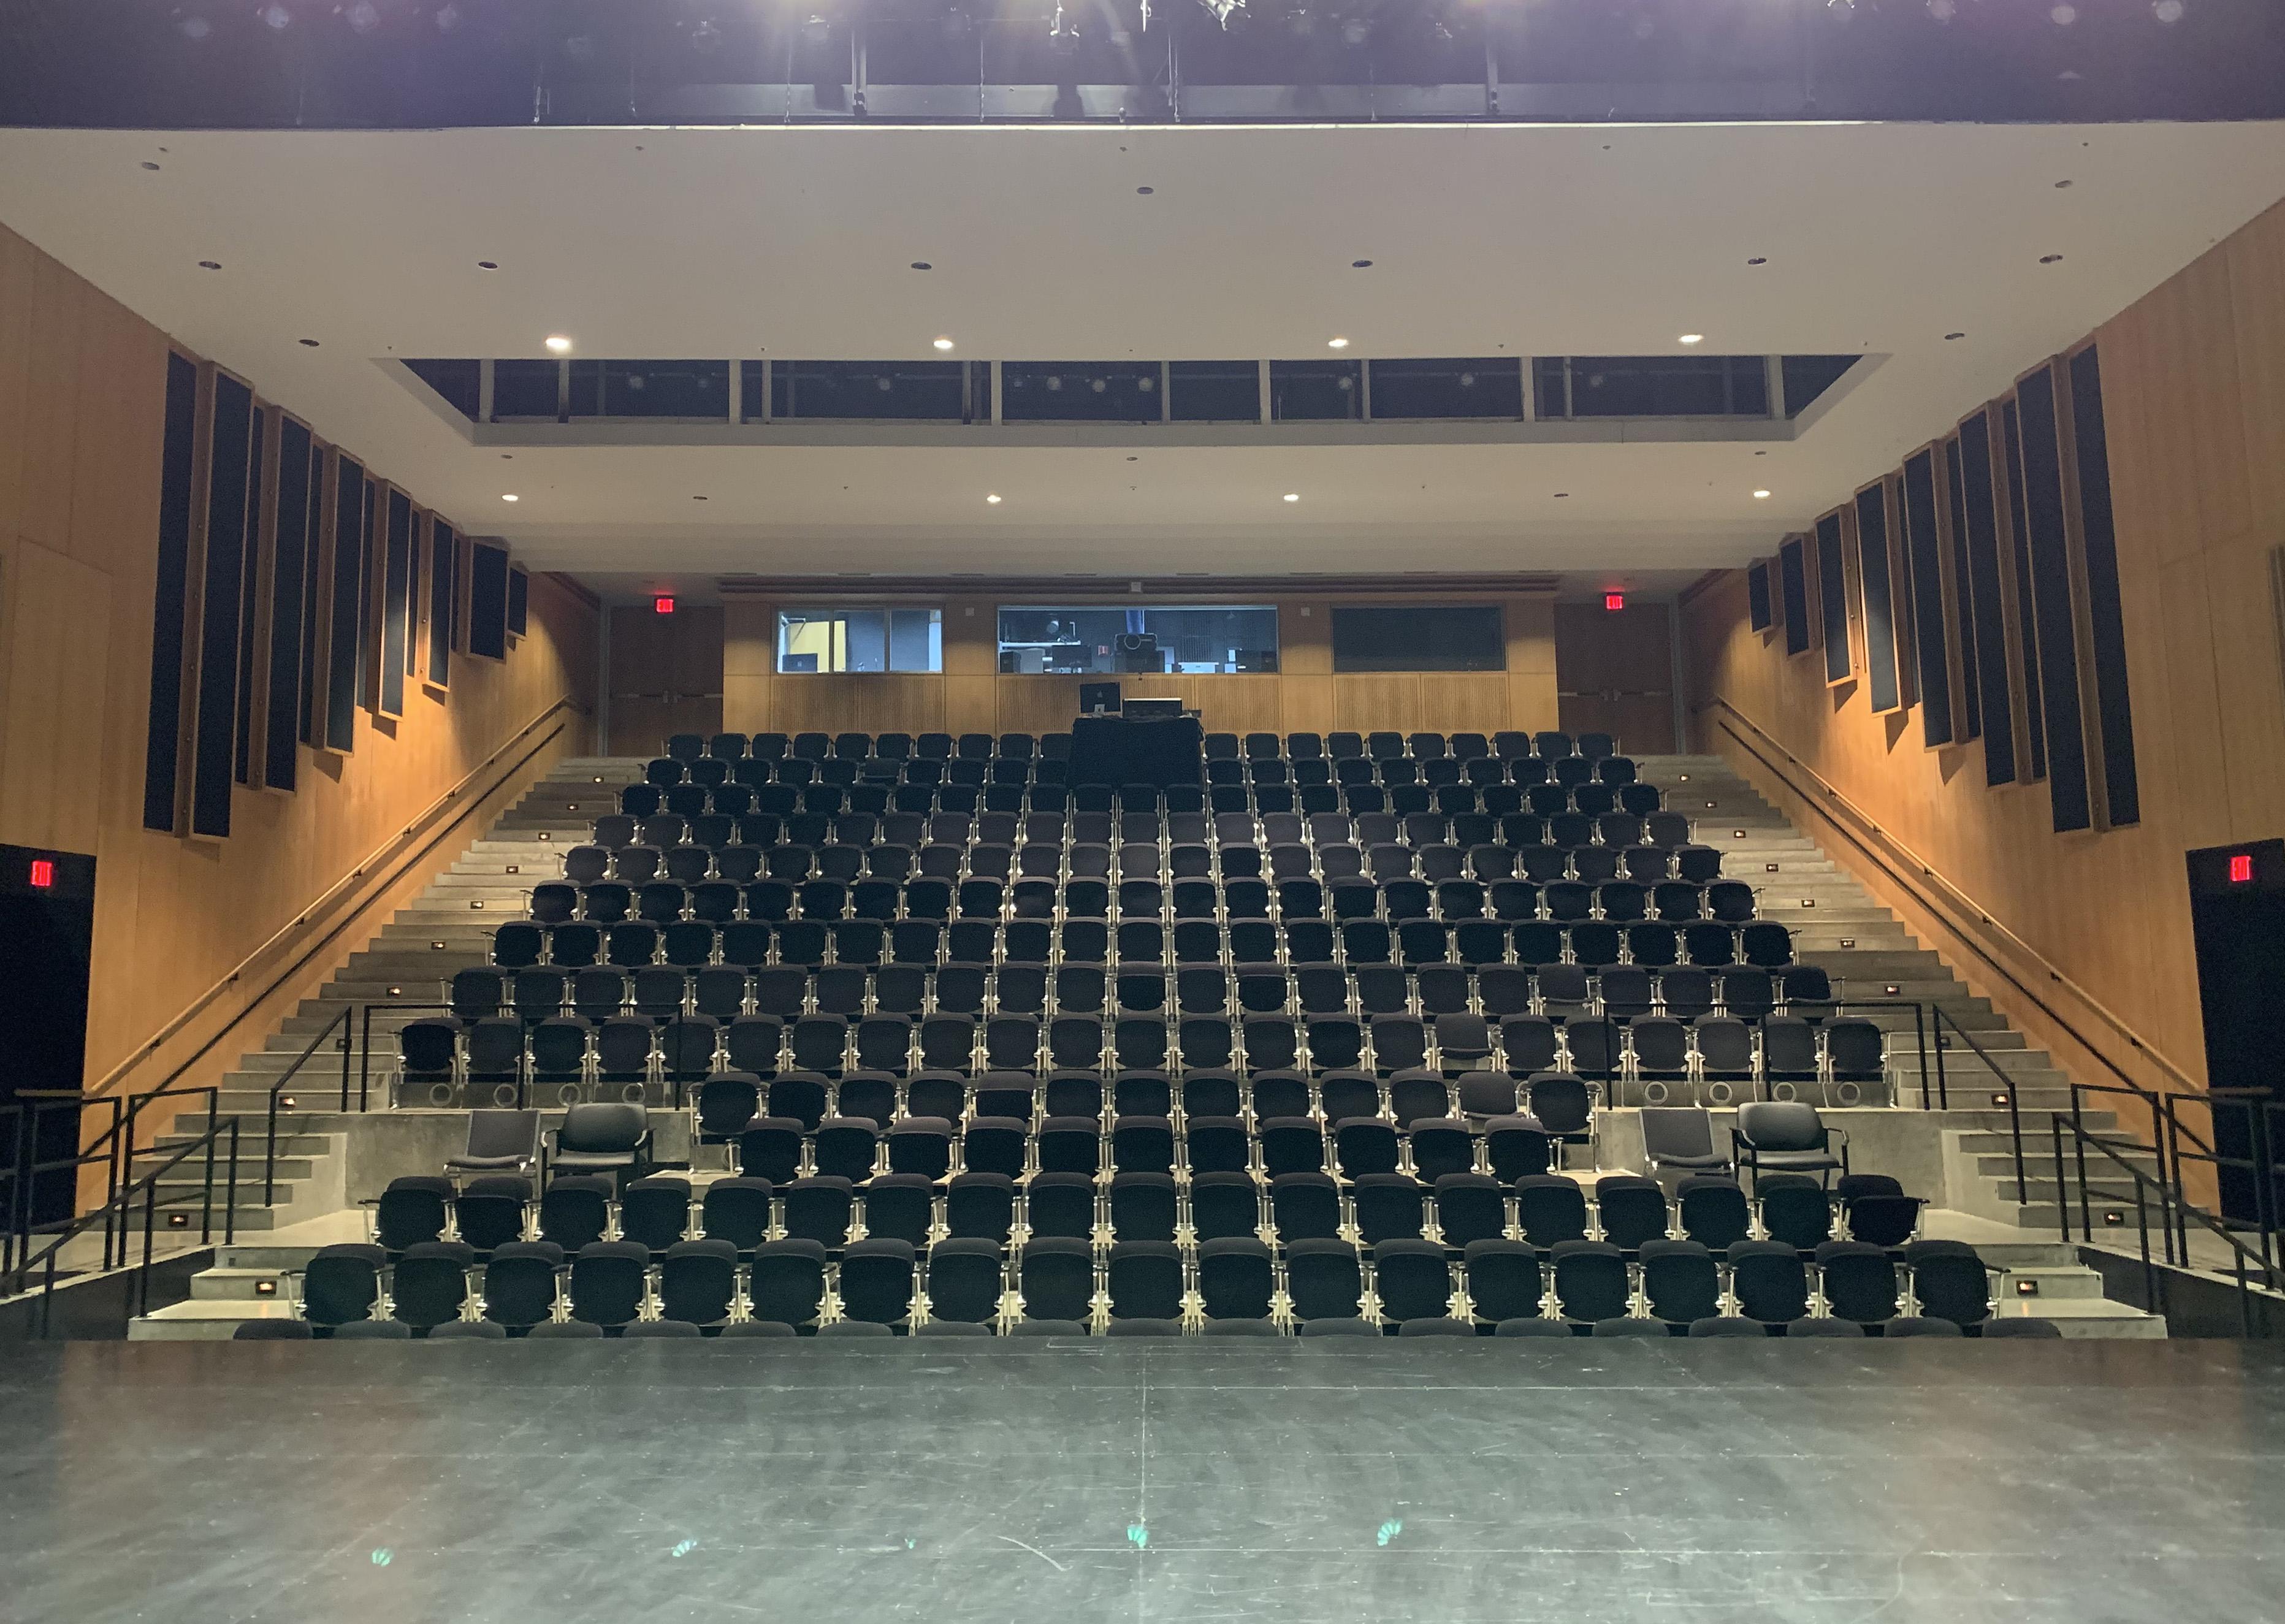 View from stage of theater with proscenium seats